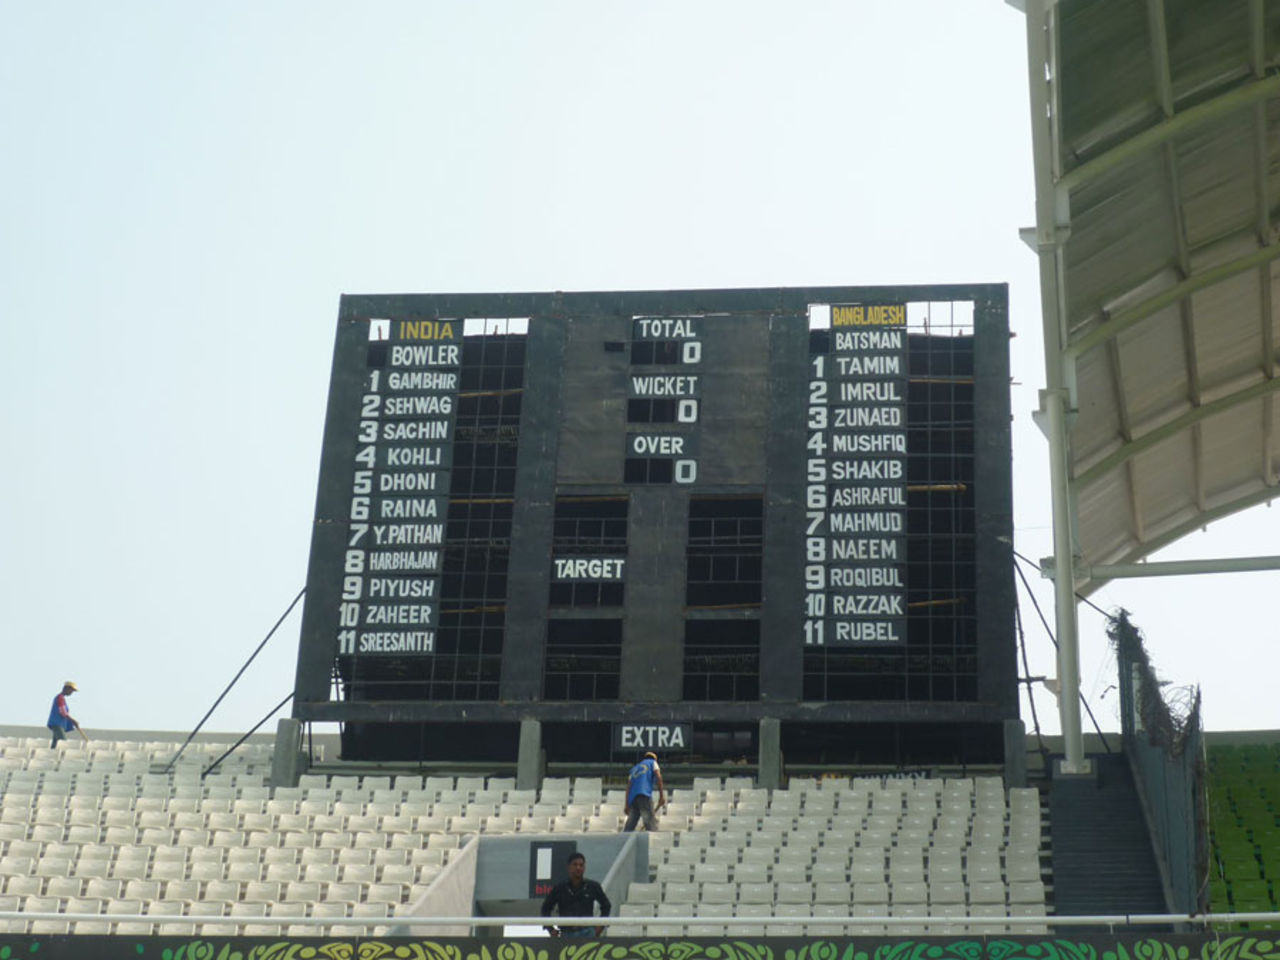 The scoreboard at the Shere Bangla stadium waits in eager anticipation for the opening game of the World Cup, Mirpur, Dhaka, February 18, 2011